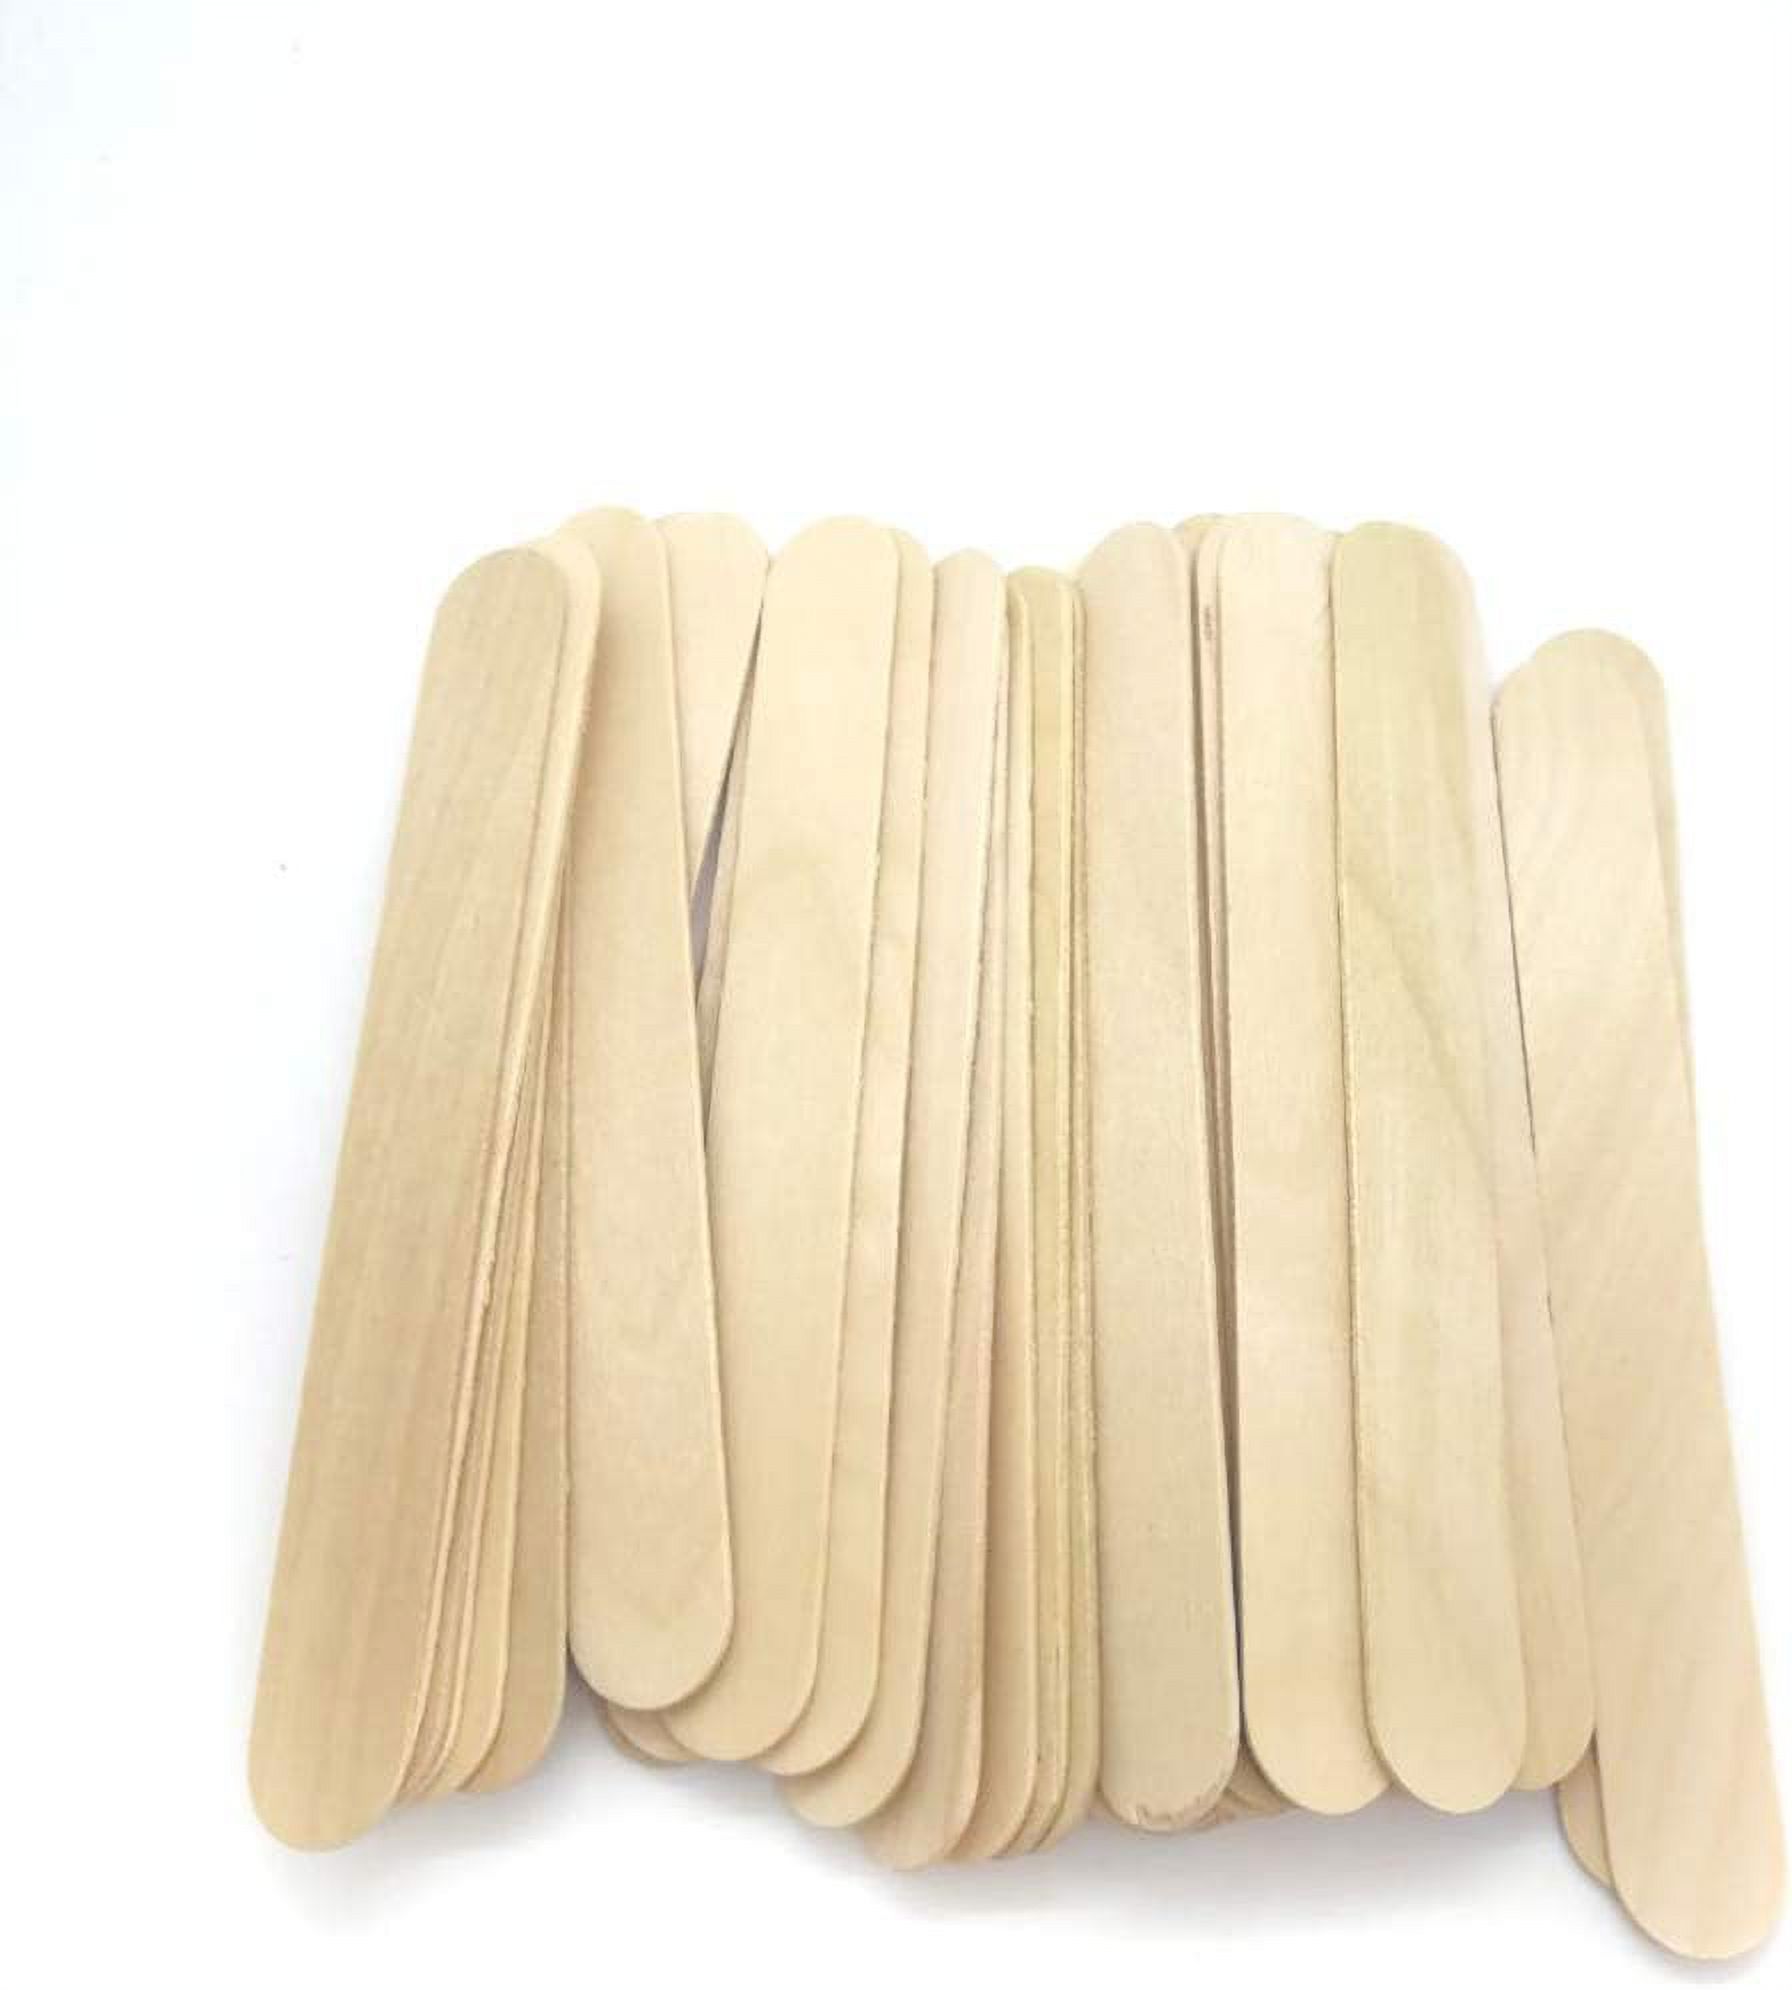 100Pcs Craft Sticks Wooden Popsicle Sticks Ice Cream Stick Premium Natural Wood  Popsicle Stick Lolly Sticks for DIY Crafts, Home Art Projects 